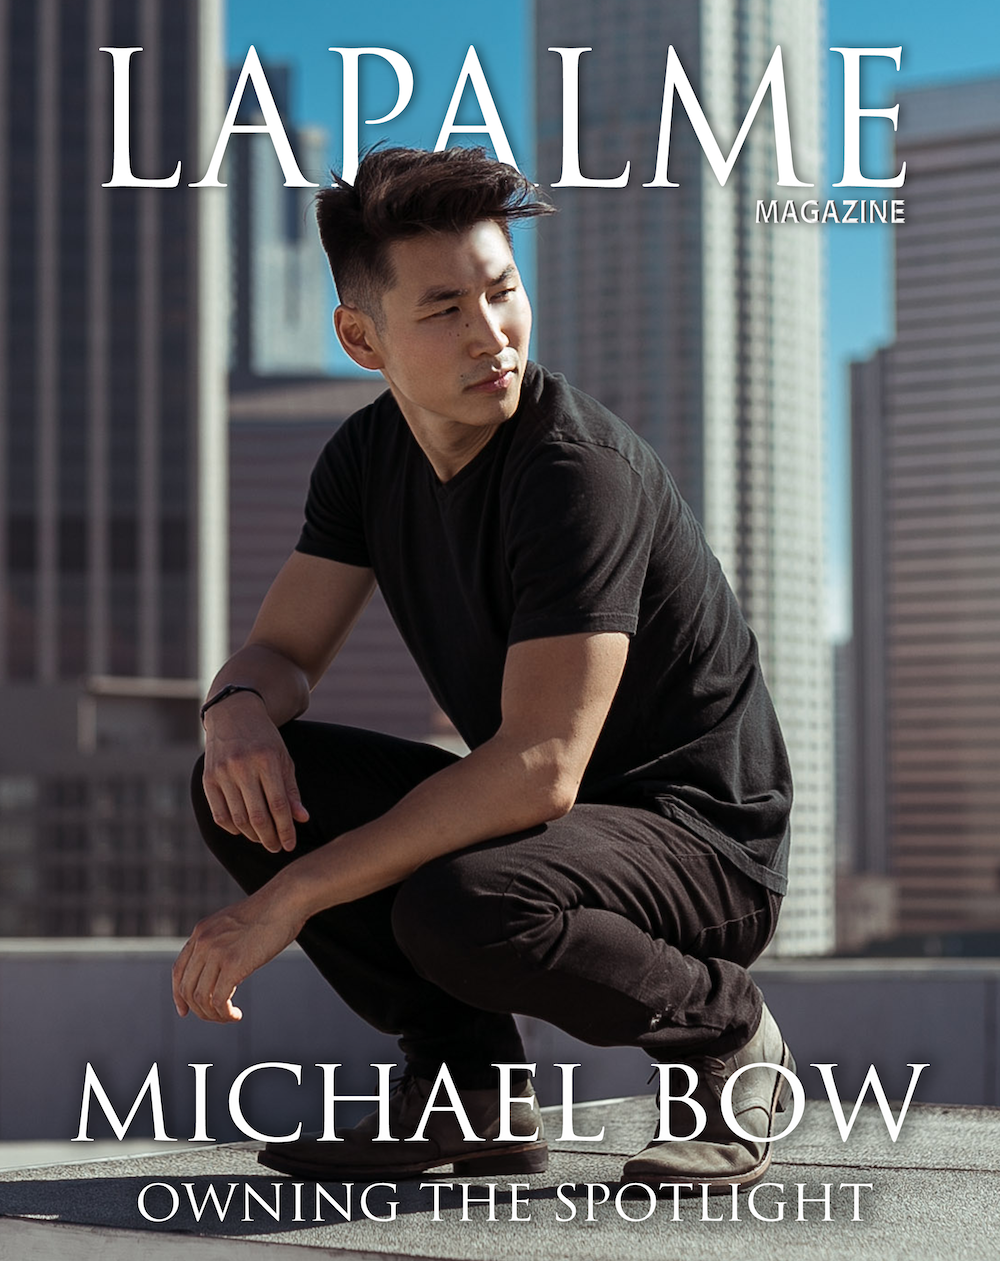 <strong>Superhuman, Superstar, and soon to be Superhero Michael Bow on Owning the Spotlight and What’s To Come Next:</strong>